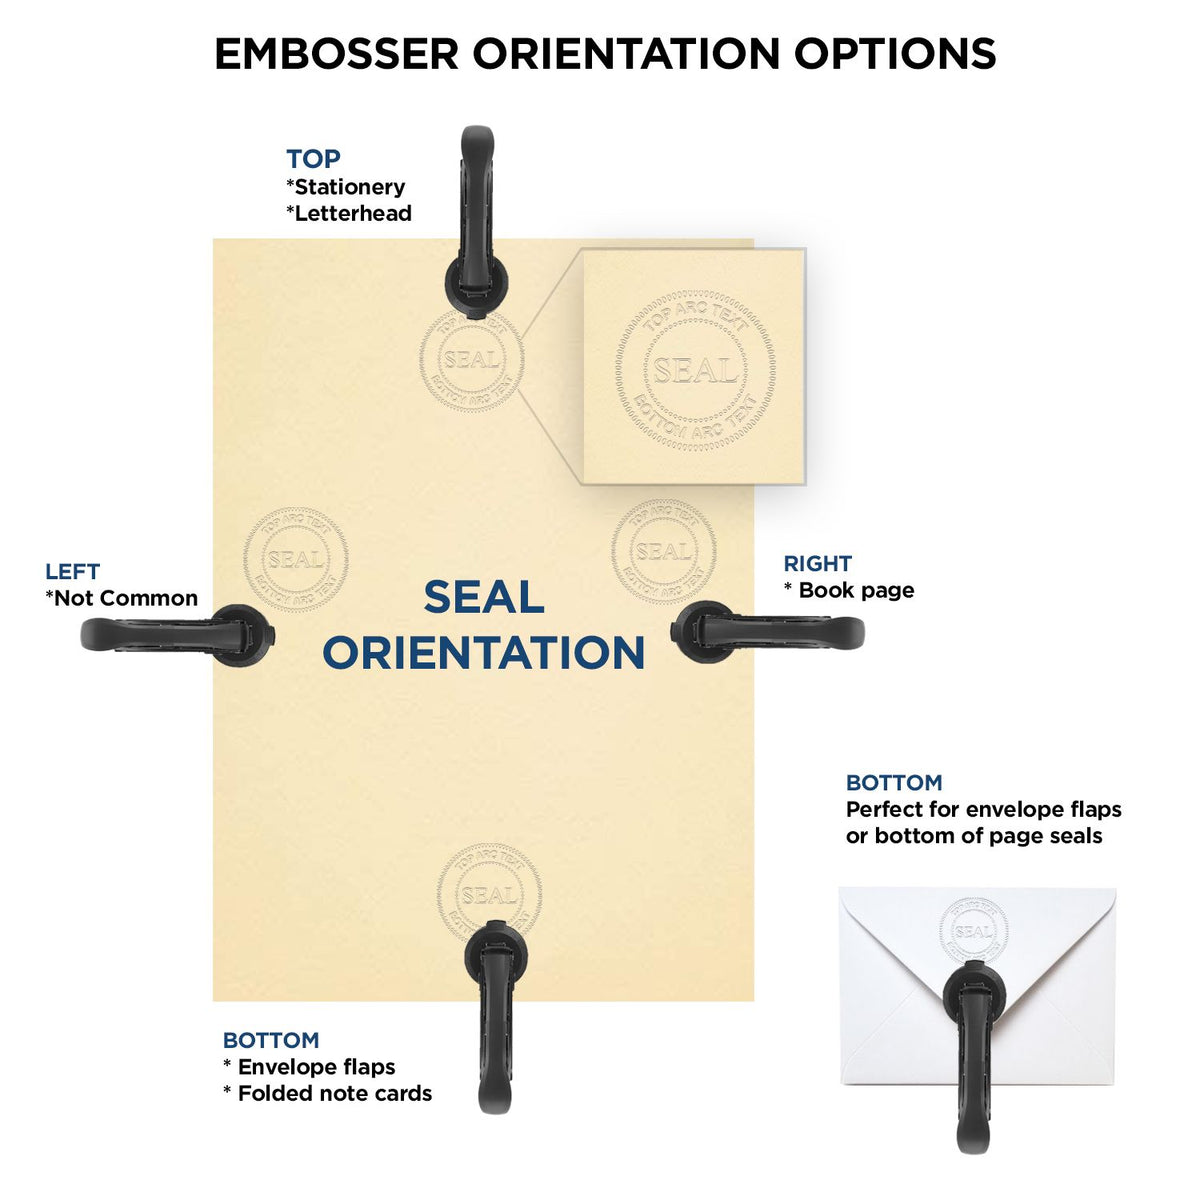 An infographic for the State of Kansas Extended Long Reach Engineer Seal showing embosser orientation, this is showing examples of a top, bottom, right and left insert.